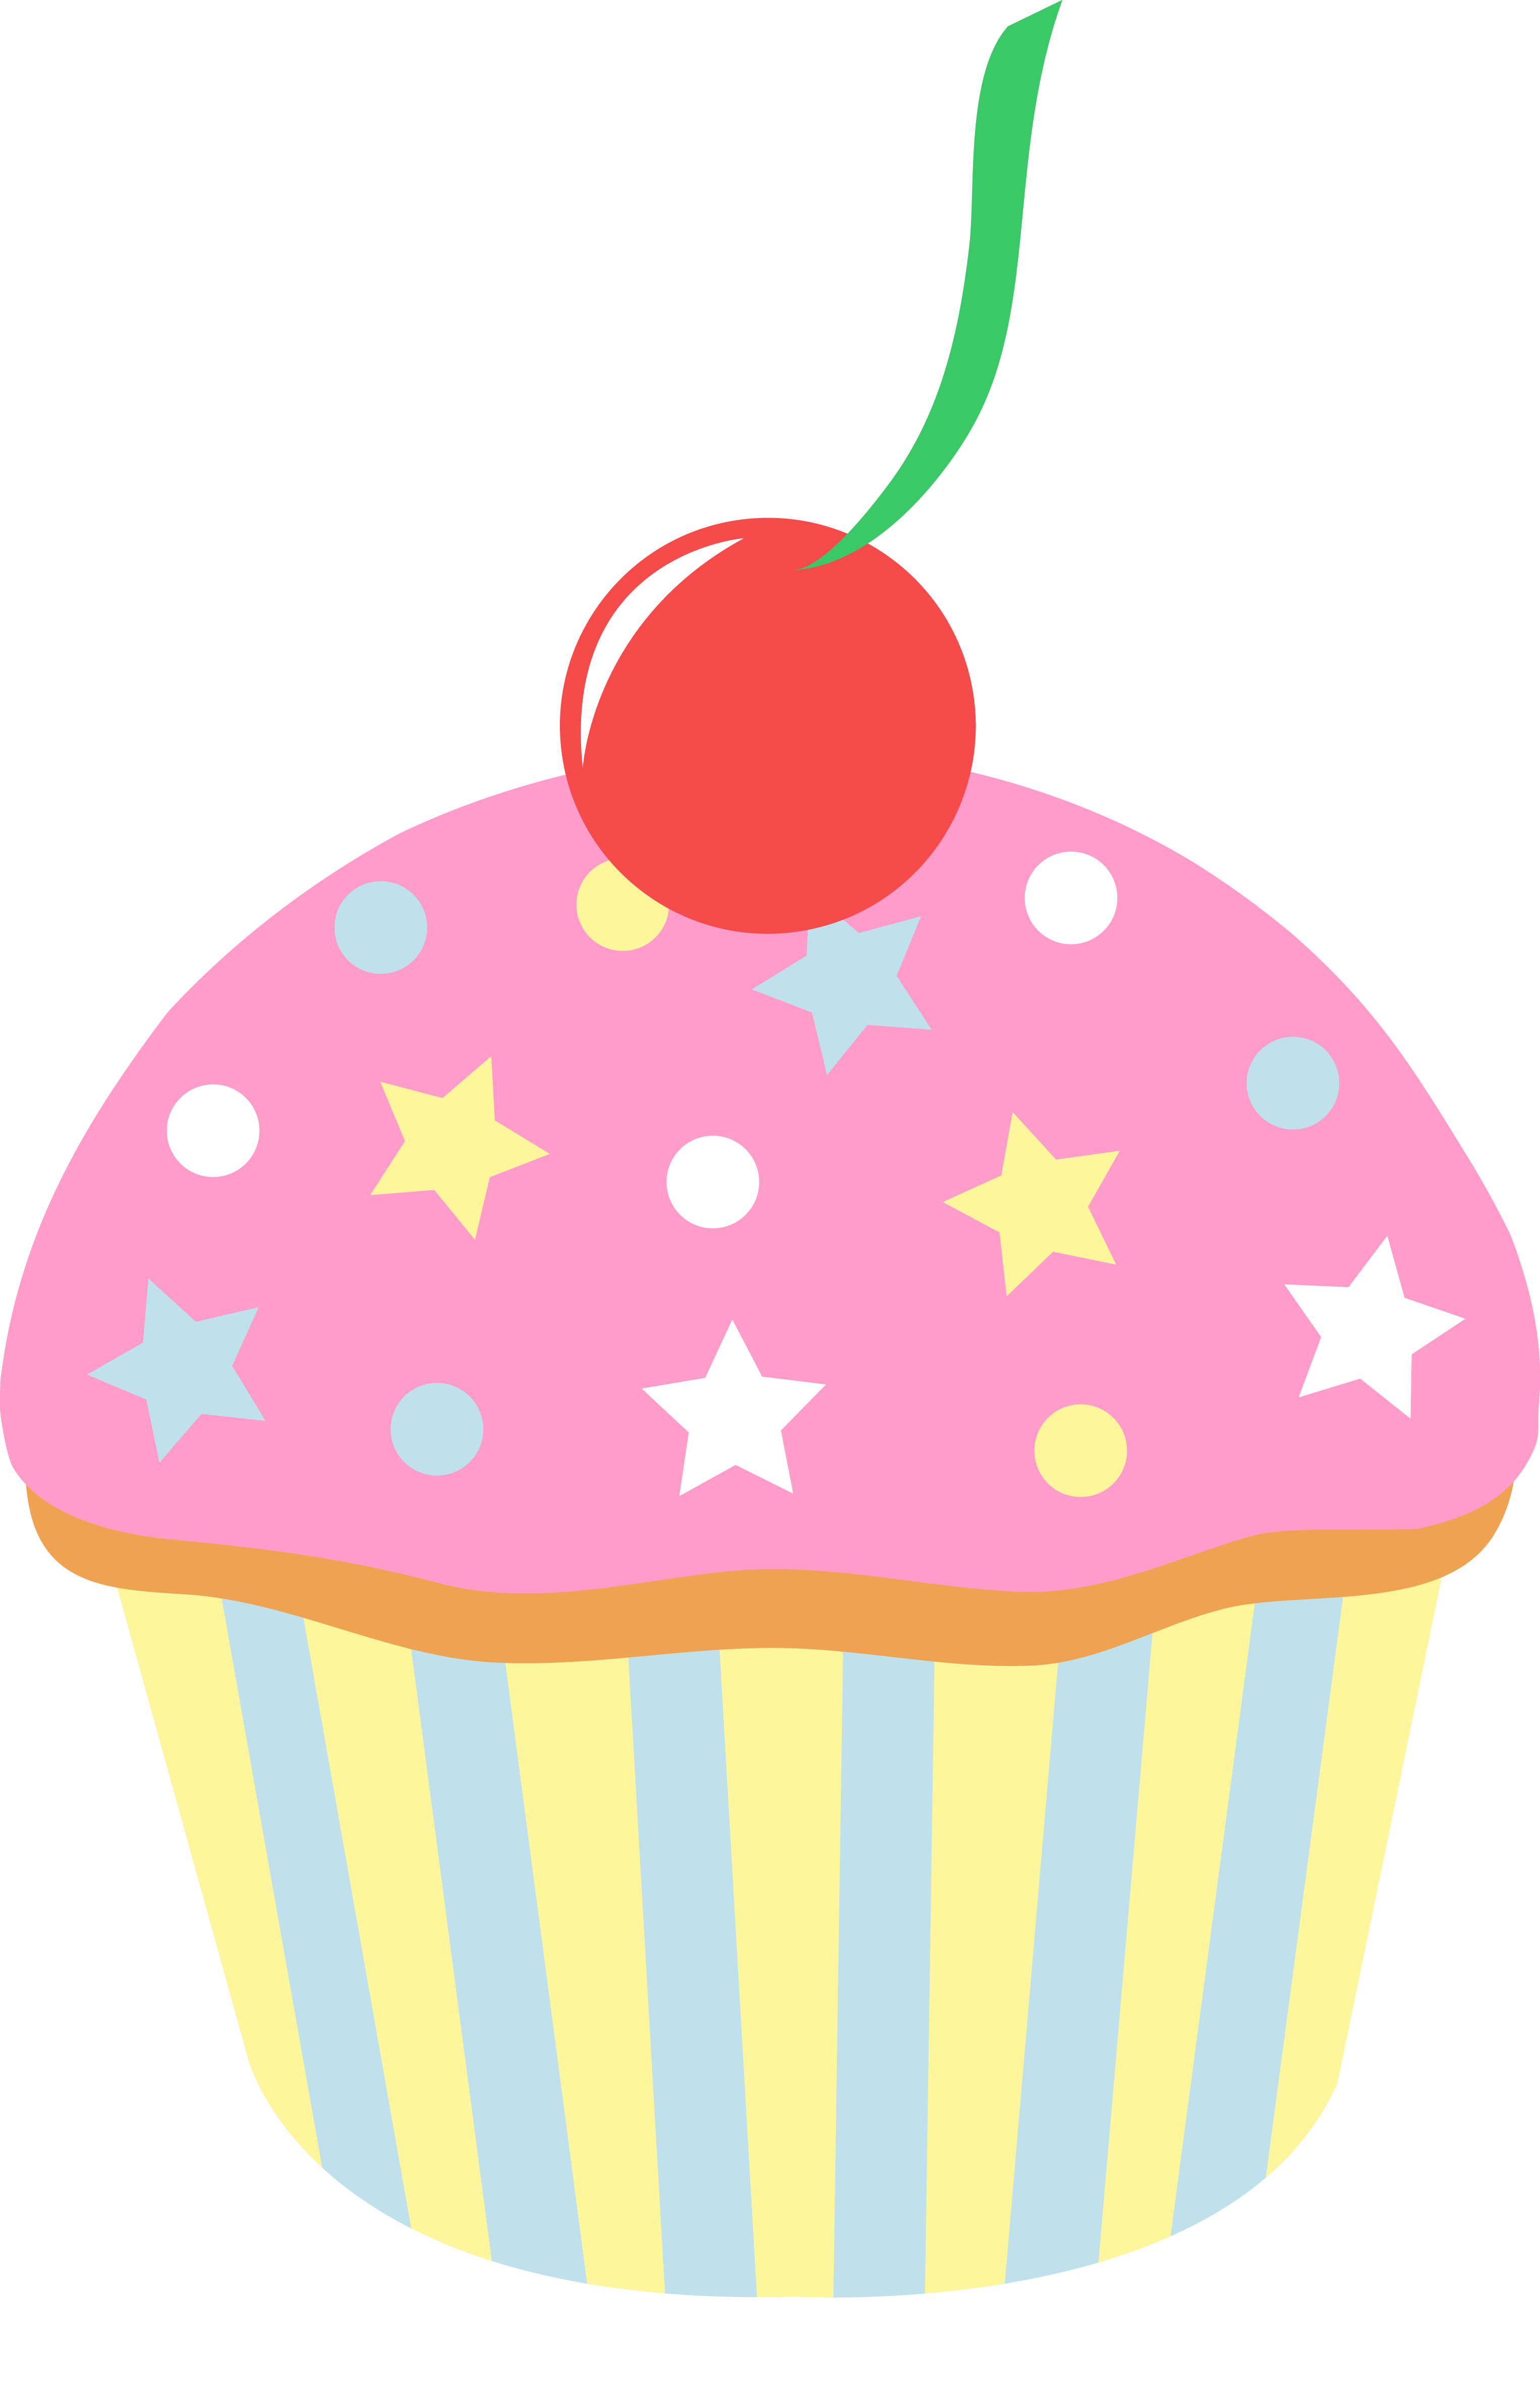 Cartoon Cupcake Cherry On Top Download Free PNG